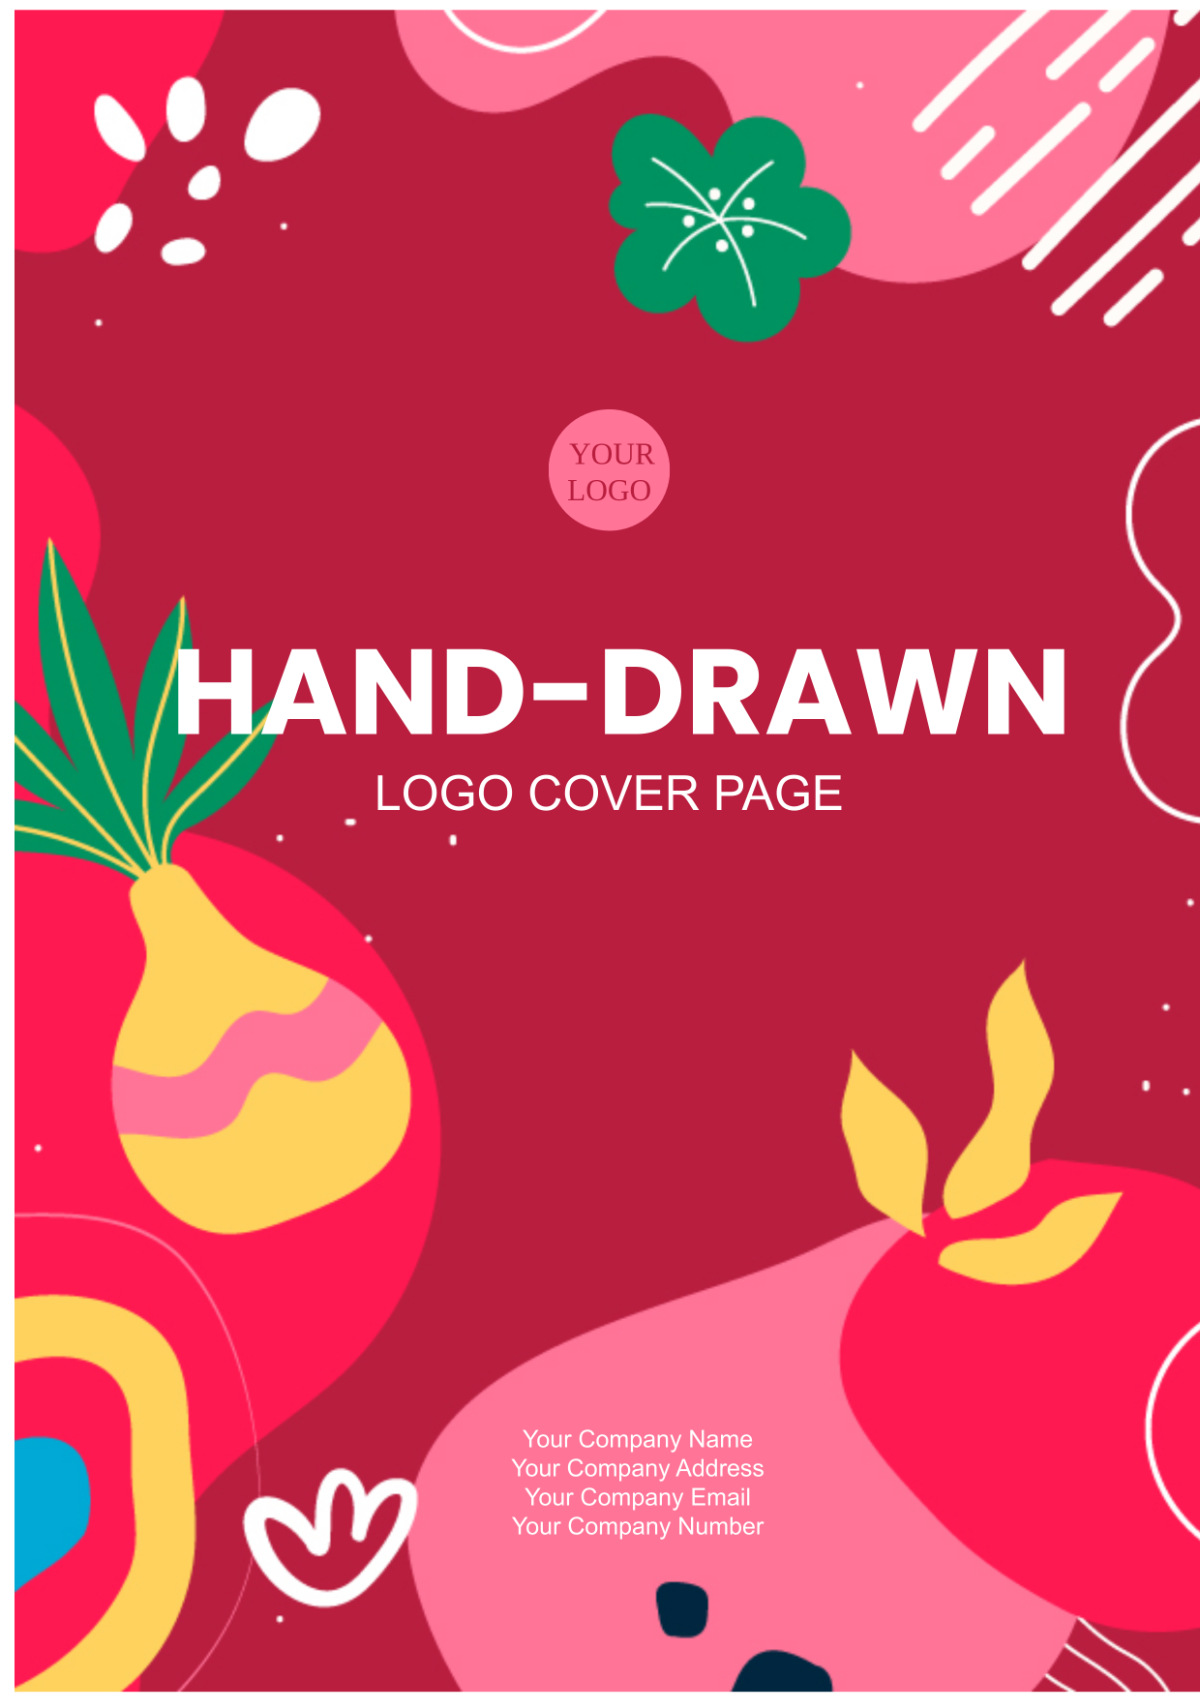 Hand-Drawn Logo Cover Page